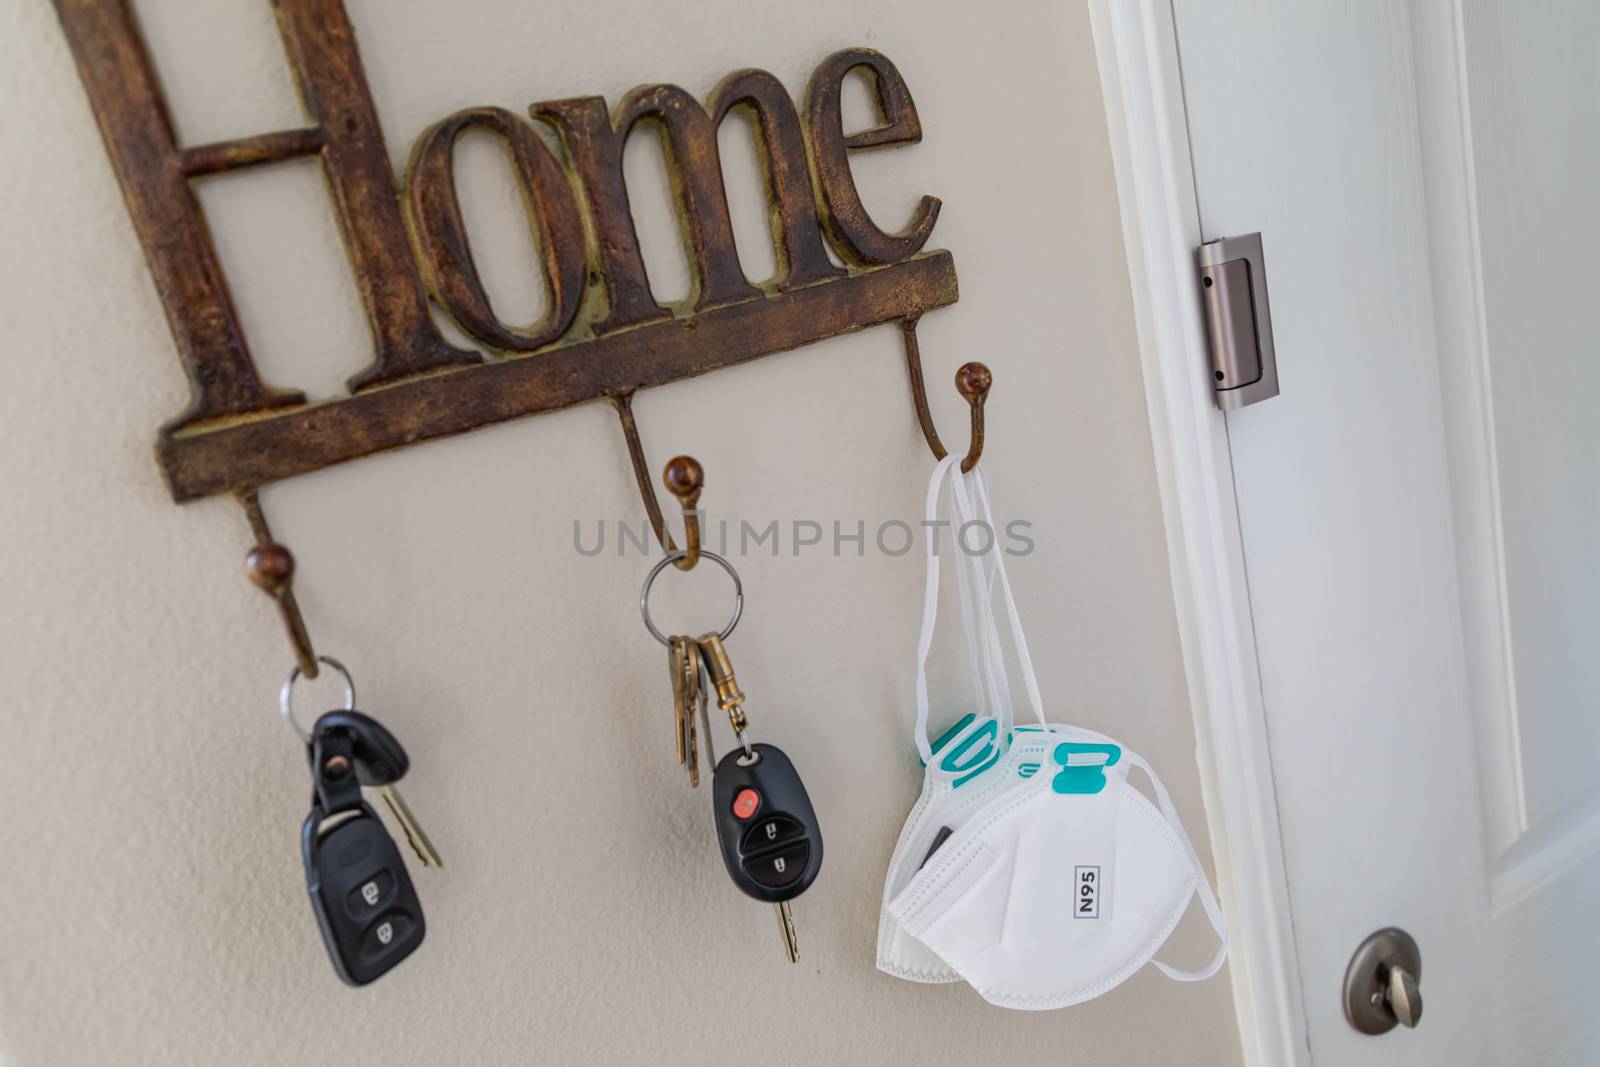 Home Key Hanger Rack Next to Door With Keys and Medical Face Mas by Feverpitched